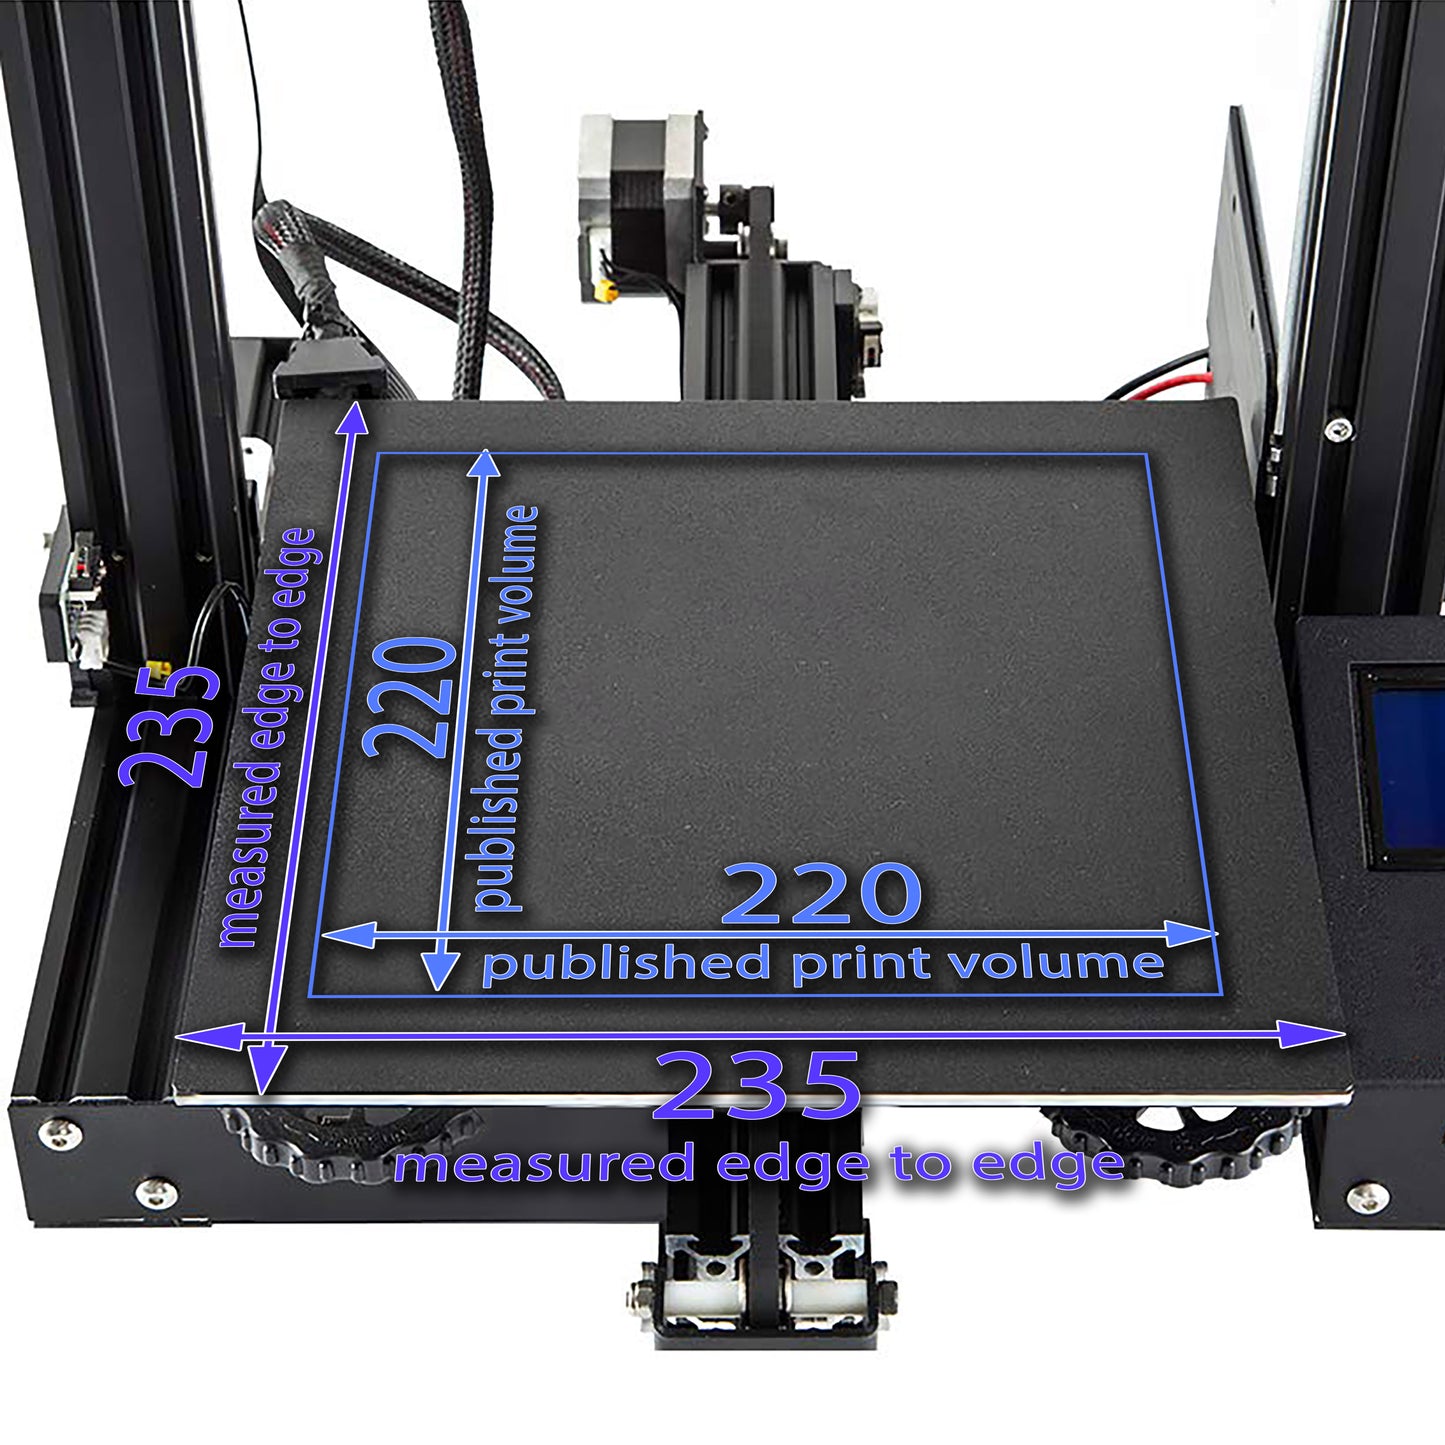 410 x 410 Kit with Pre-Installed PEX Build Surface - Creality CR-10 S4, Voron Core XY